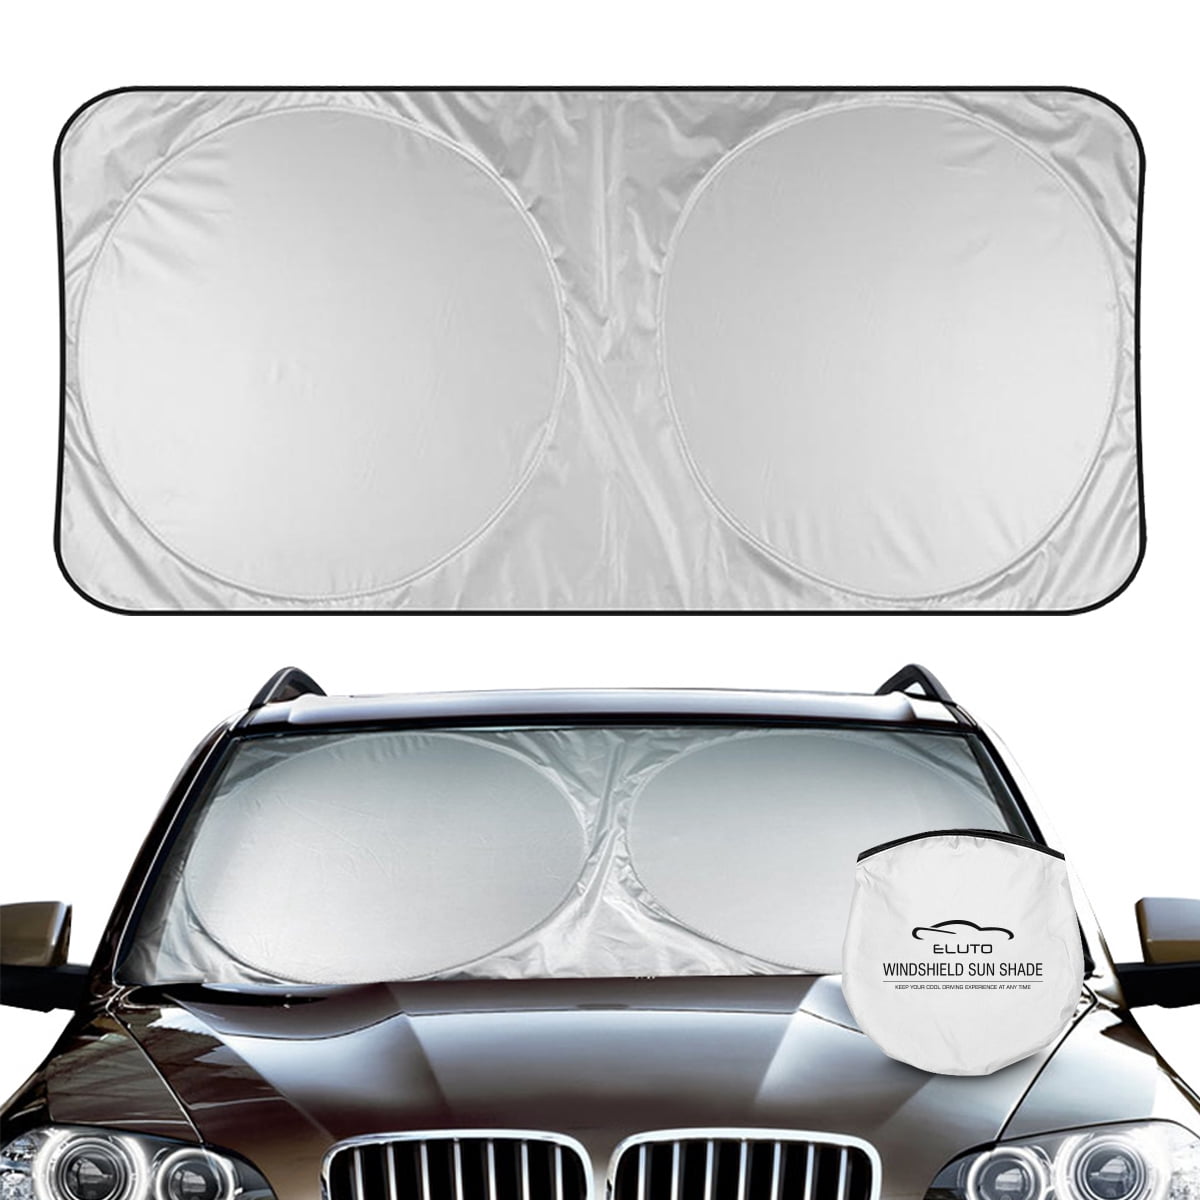 Sunset Design Car Sun Shade Blocks UV Rays Foldable Protector Front Windshield Sun Visor to Keep Your Vehicle Cool for Car SUV Truck 55 x 29.9 Inch 